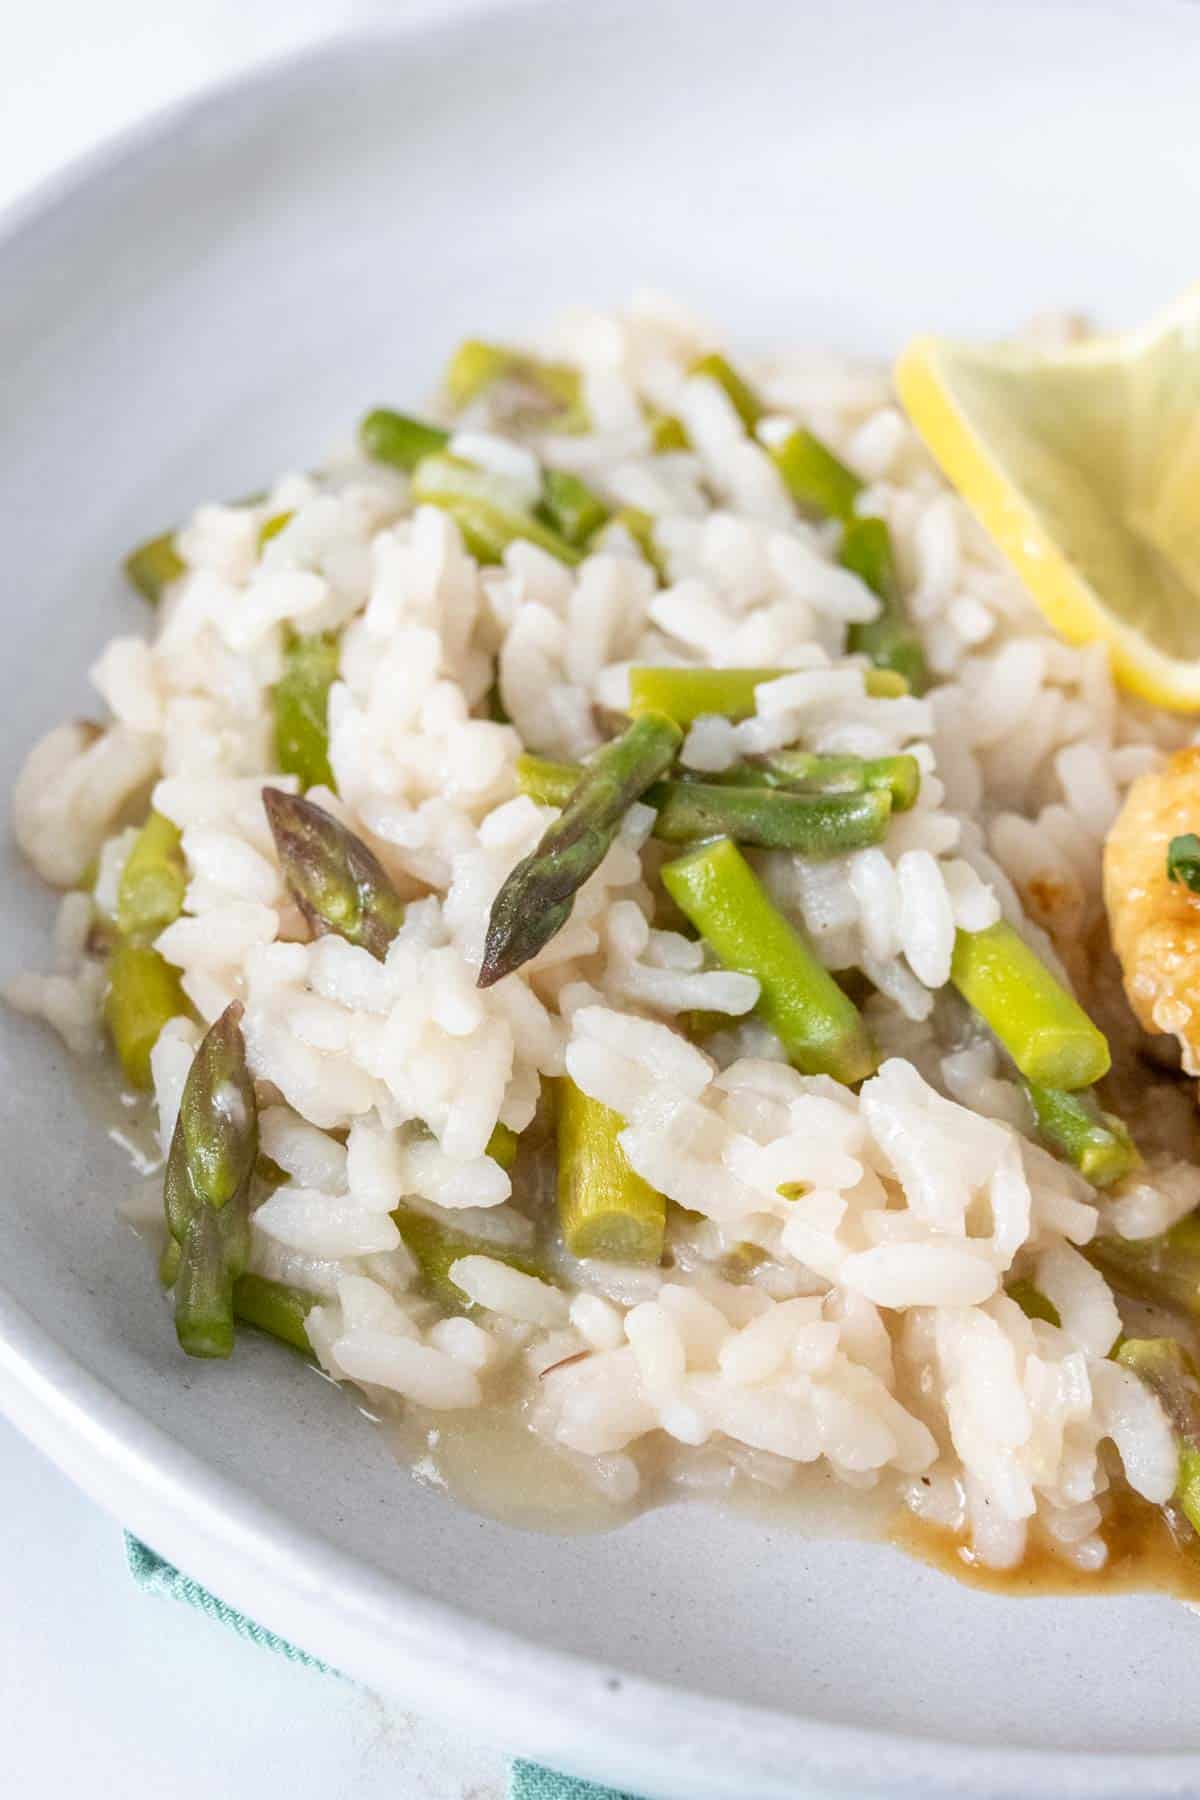 Asparagus risotto on a gray plate.